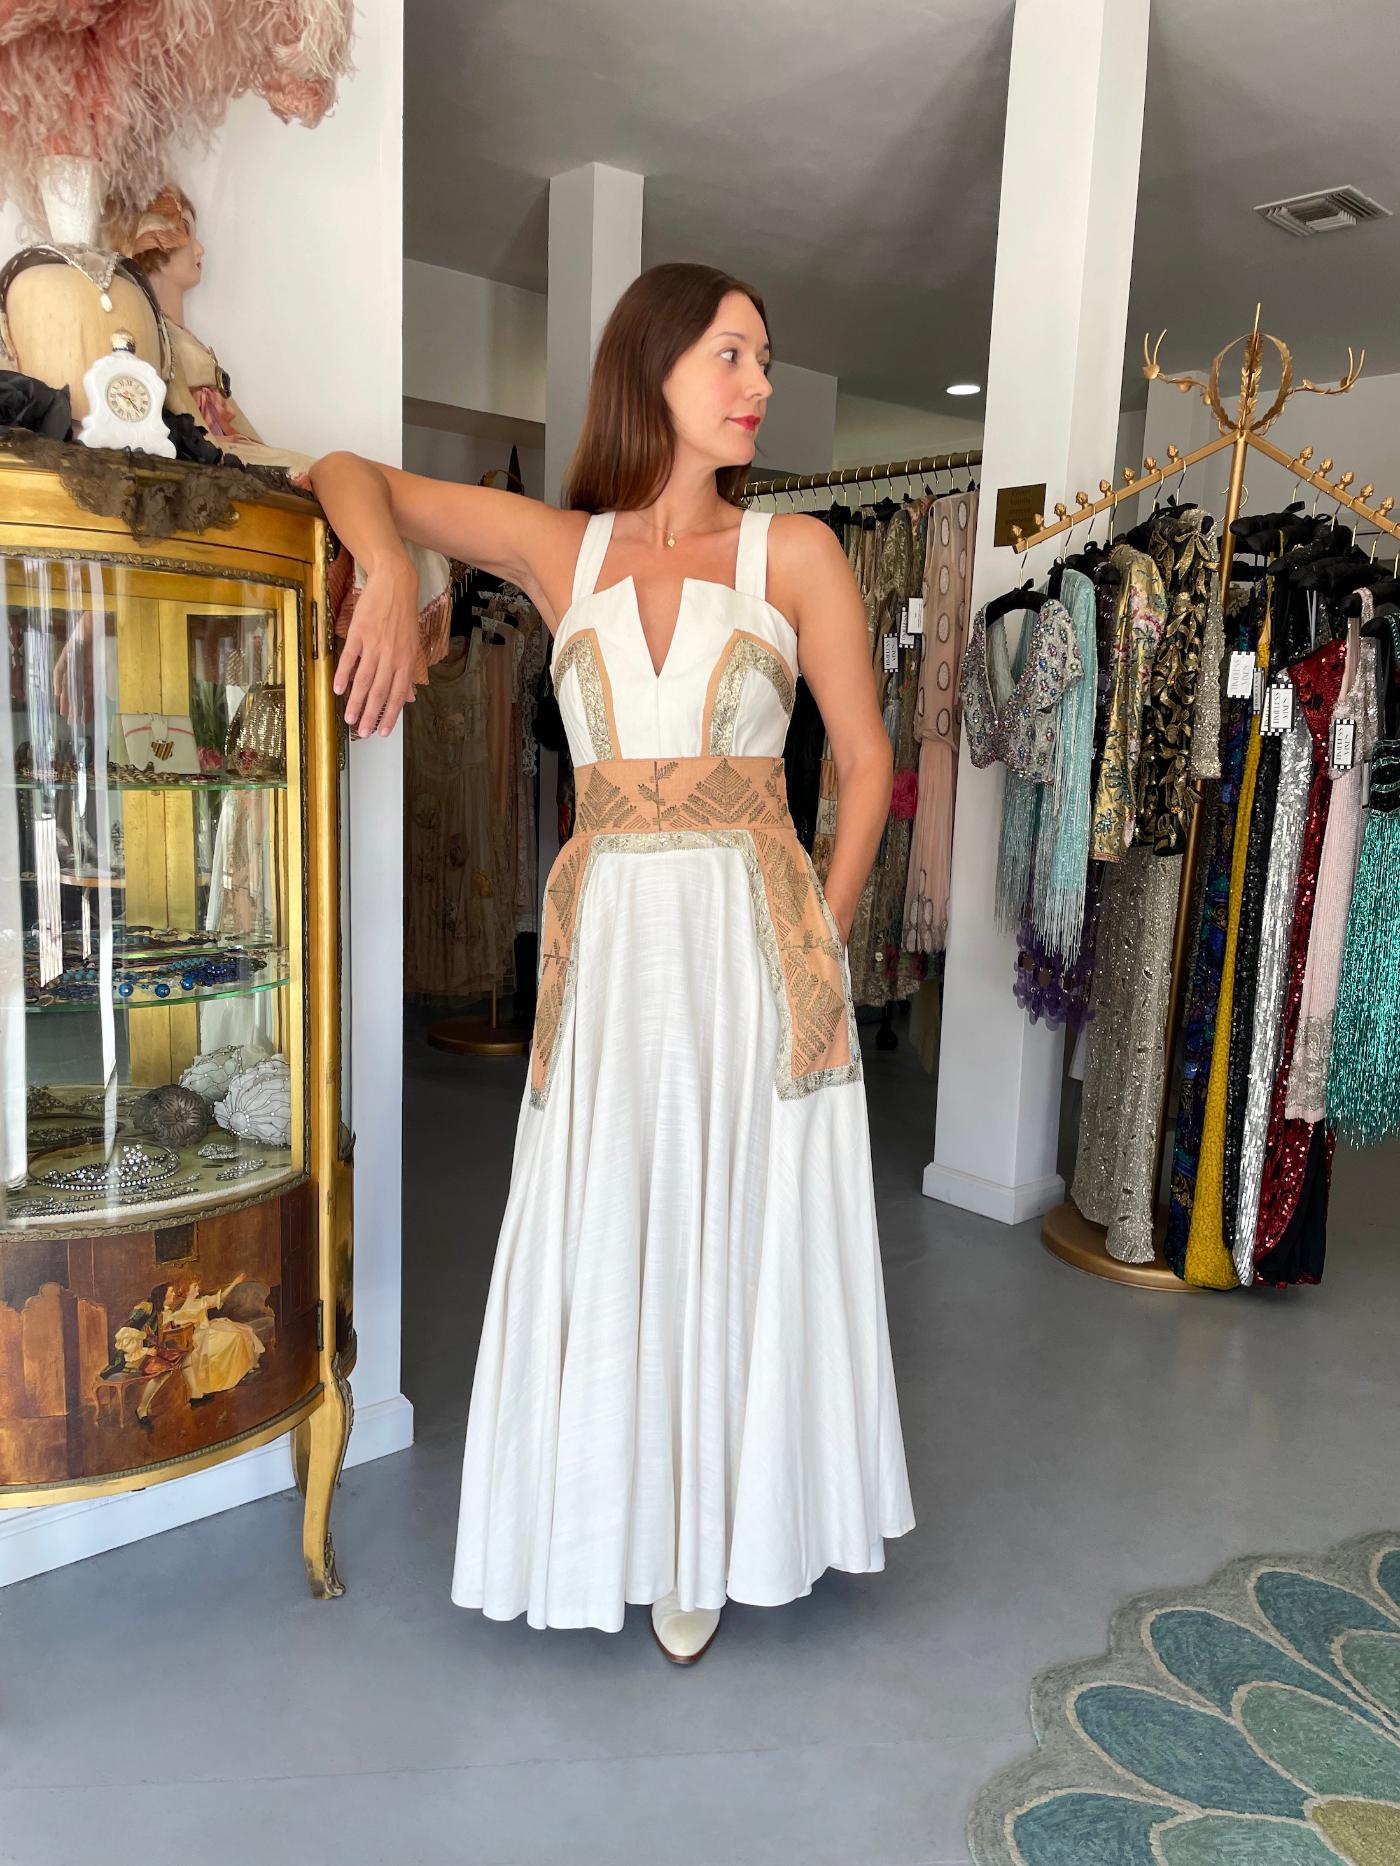 An exceptionally beautiful and incredibly rare Jeanne Lanvin Castillo couture metallic accented ivory white gown ensemble dating back to the mid 1950's. Castillo was invited by Jeanne Lanvin's daughter to design for her mother's firm in Paris, with